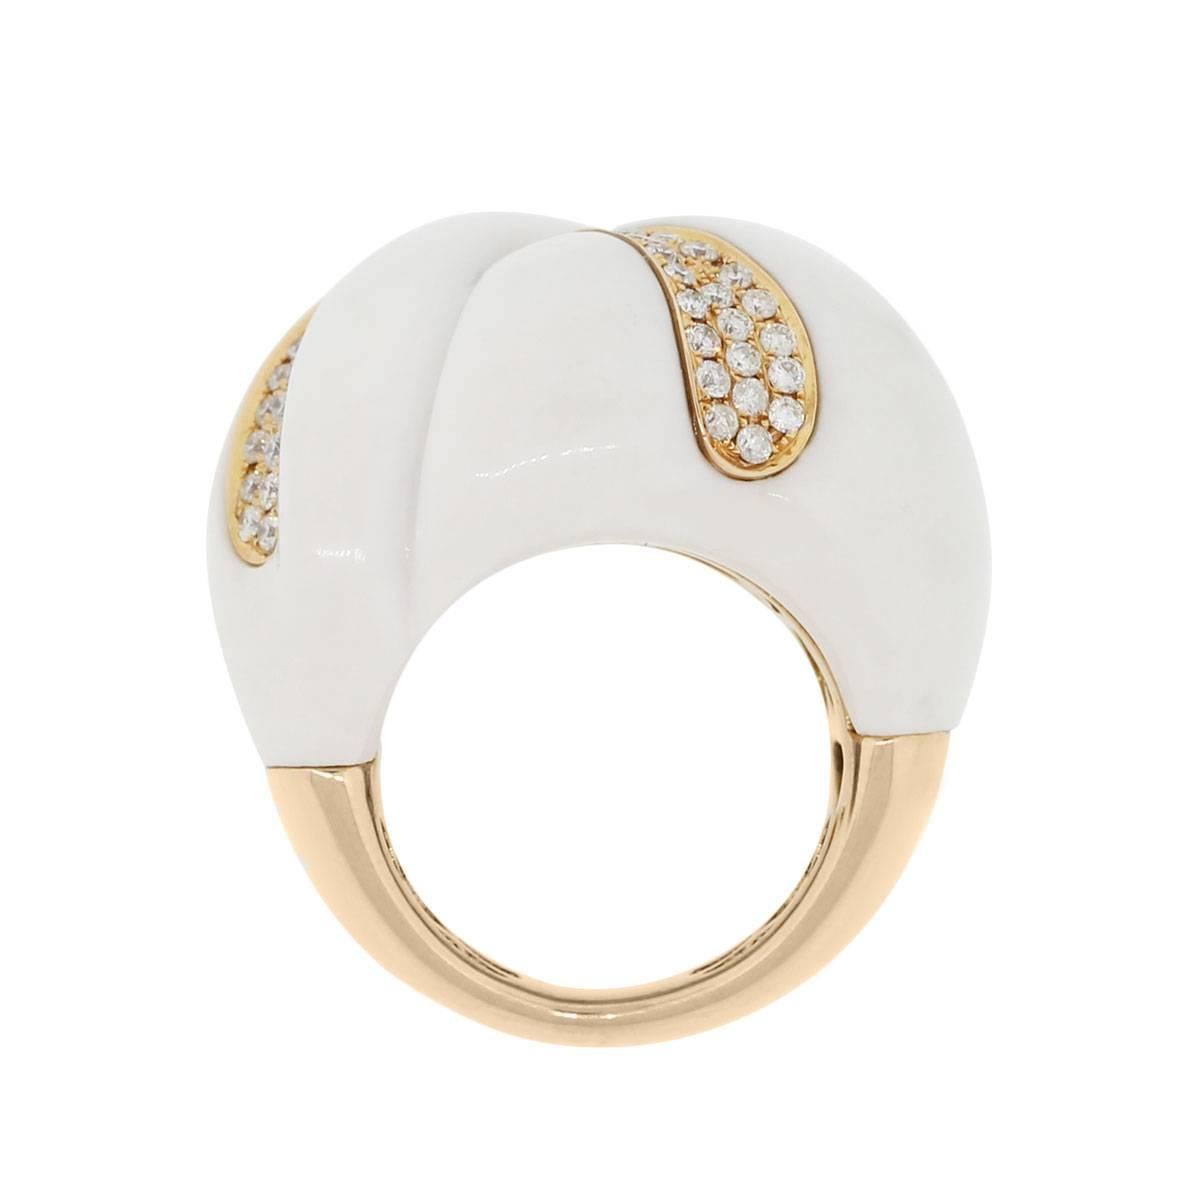 Material: 18k rose gold
Diamond Details: Approximately 0.50ctw of round brilliant diamonds. Diamonds are H/I in color and SI in clarity
Gemstone Details: Carved white agate
Ring Size: 7
Ring Measurements: 1.25″ x 1.12″ x 1.12″
Total Weight: 27g